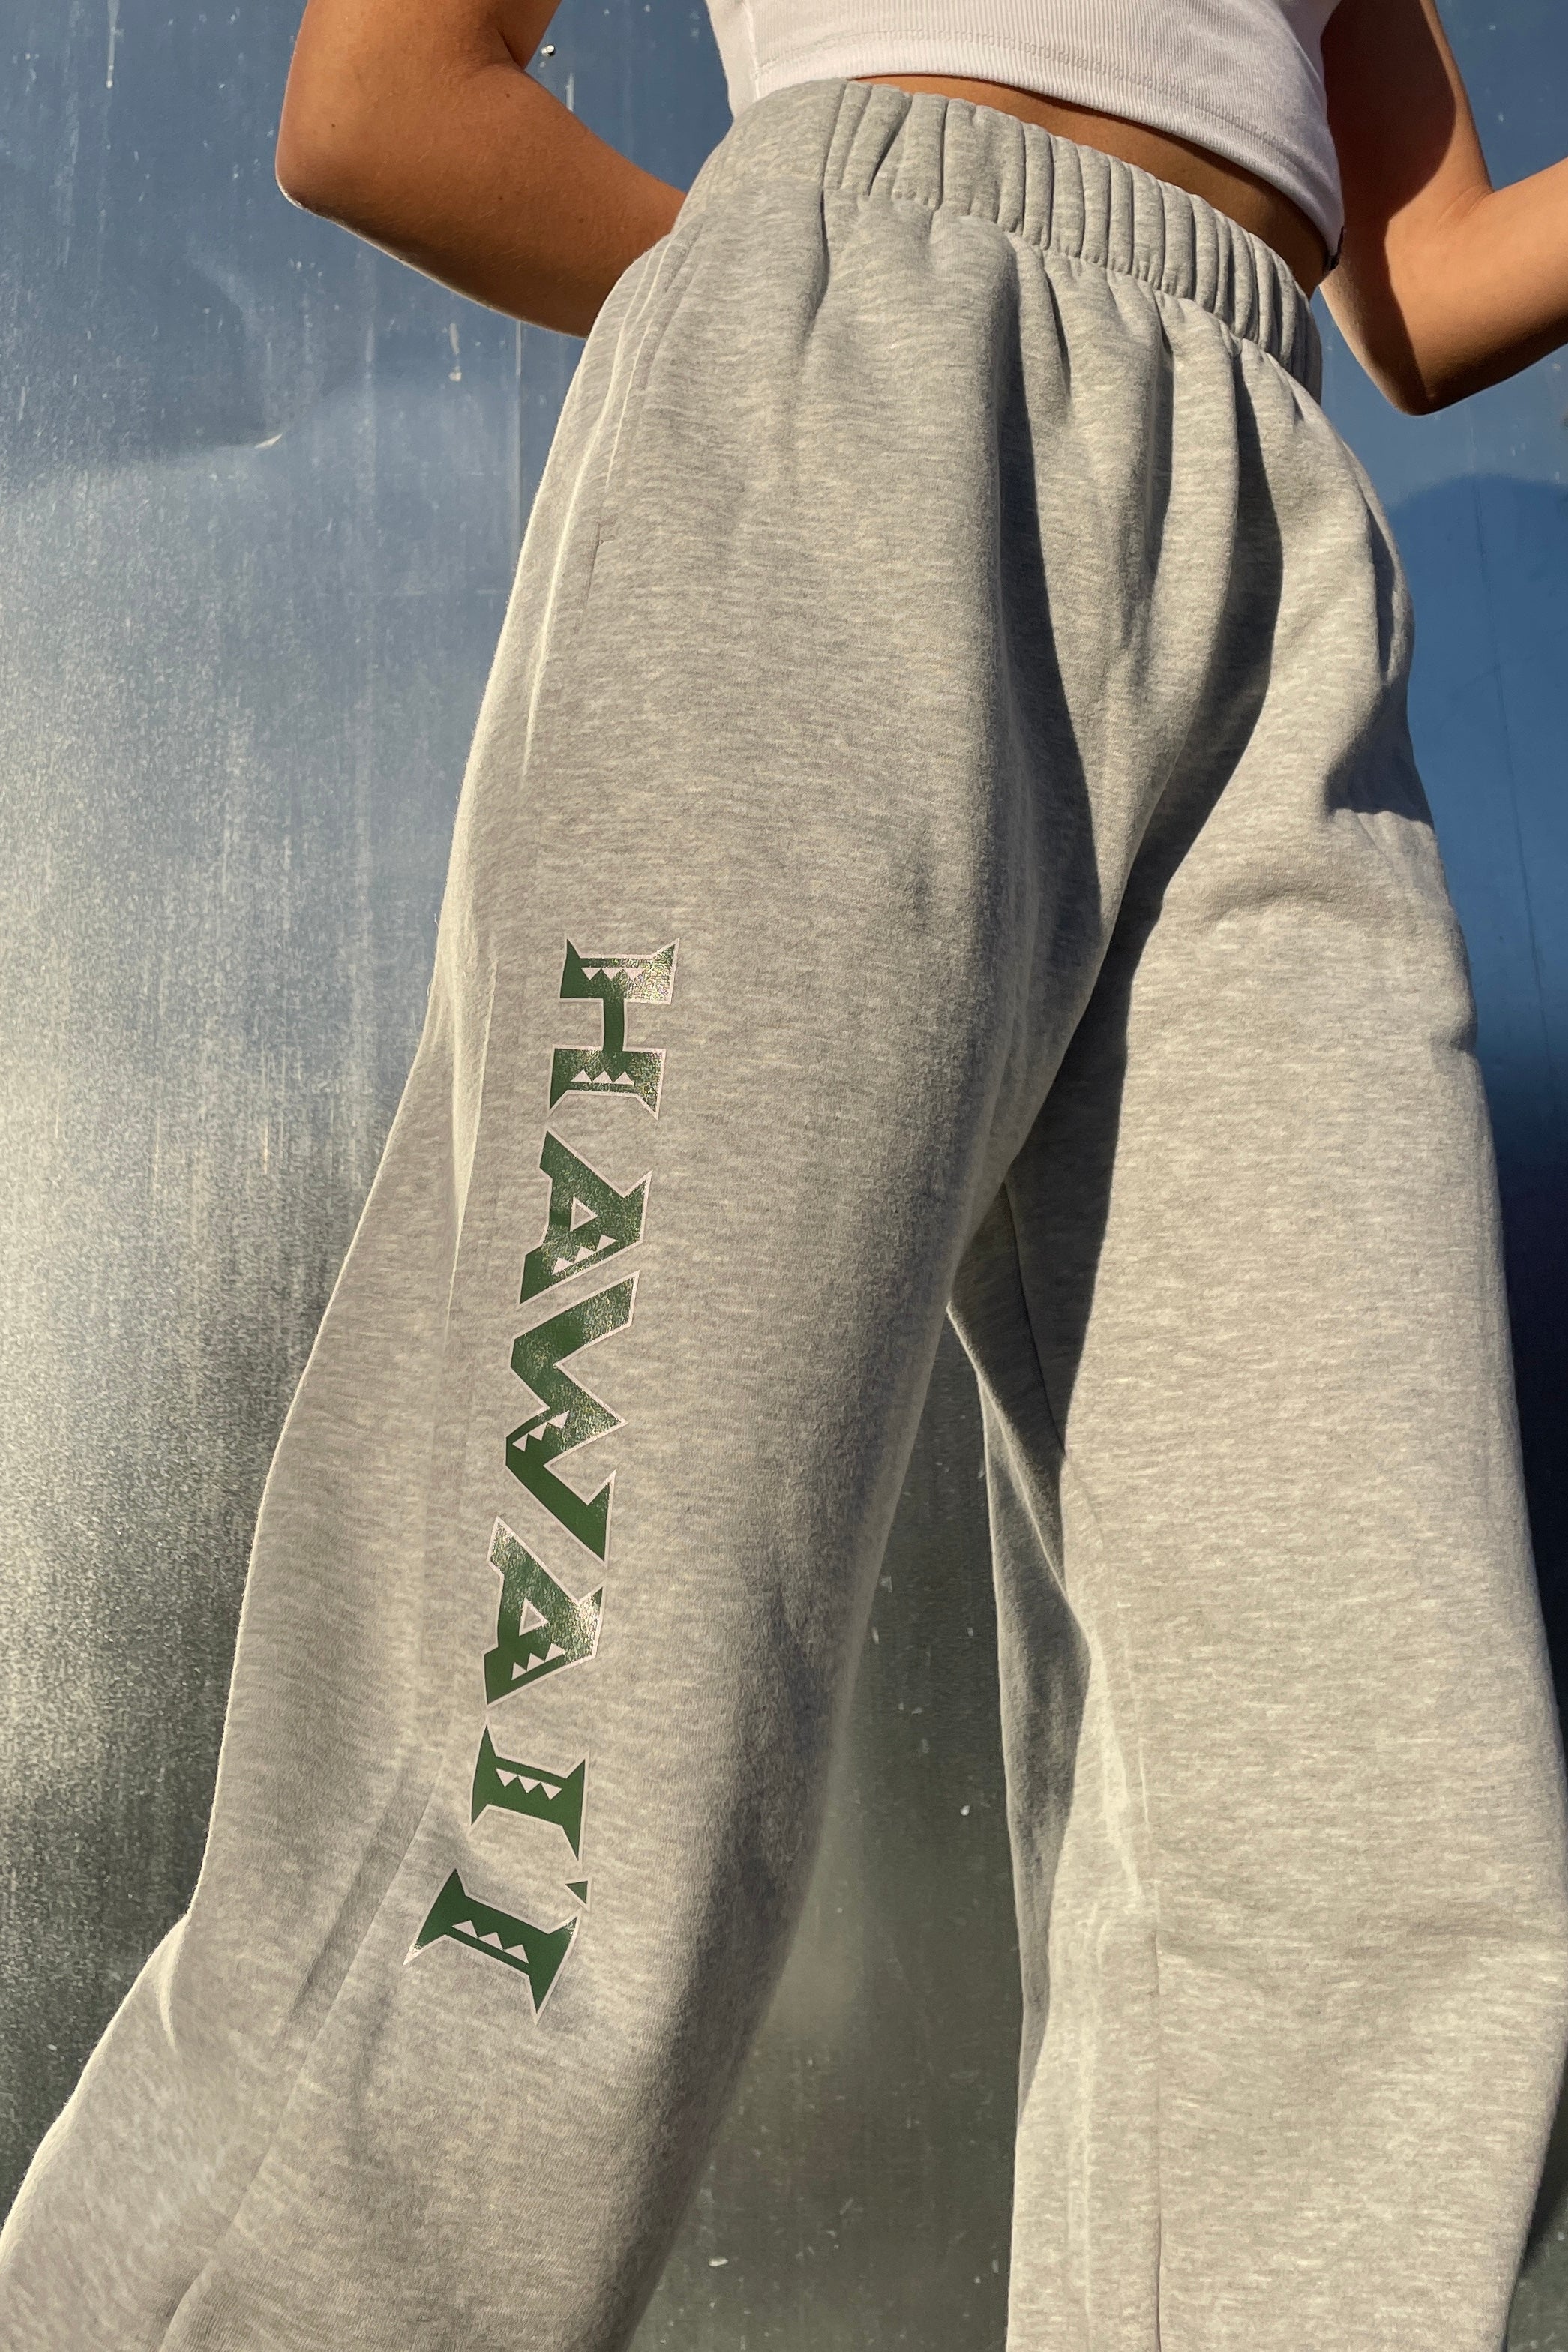 FIU Mia Sweatpants X-Small / Navy | Hype and Vice